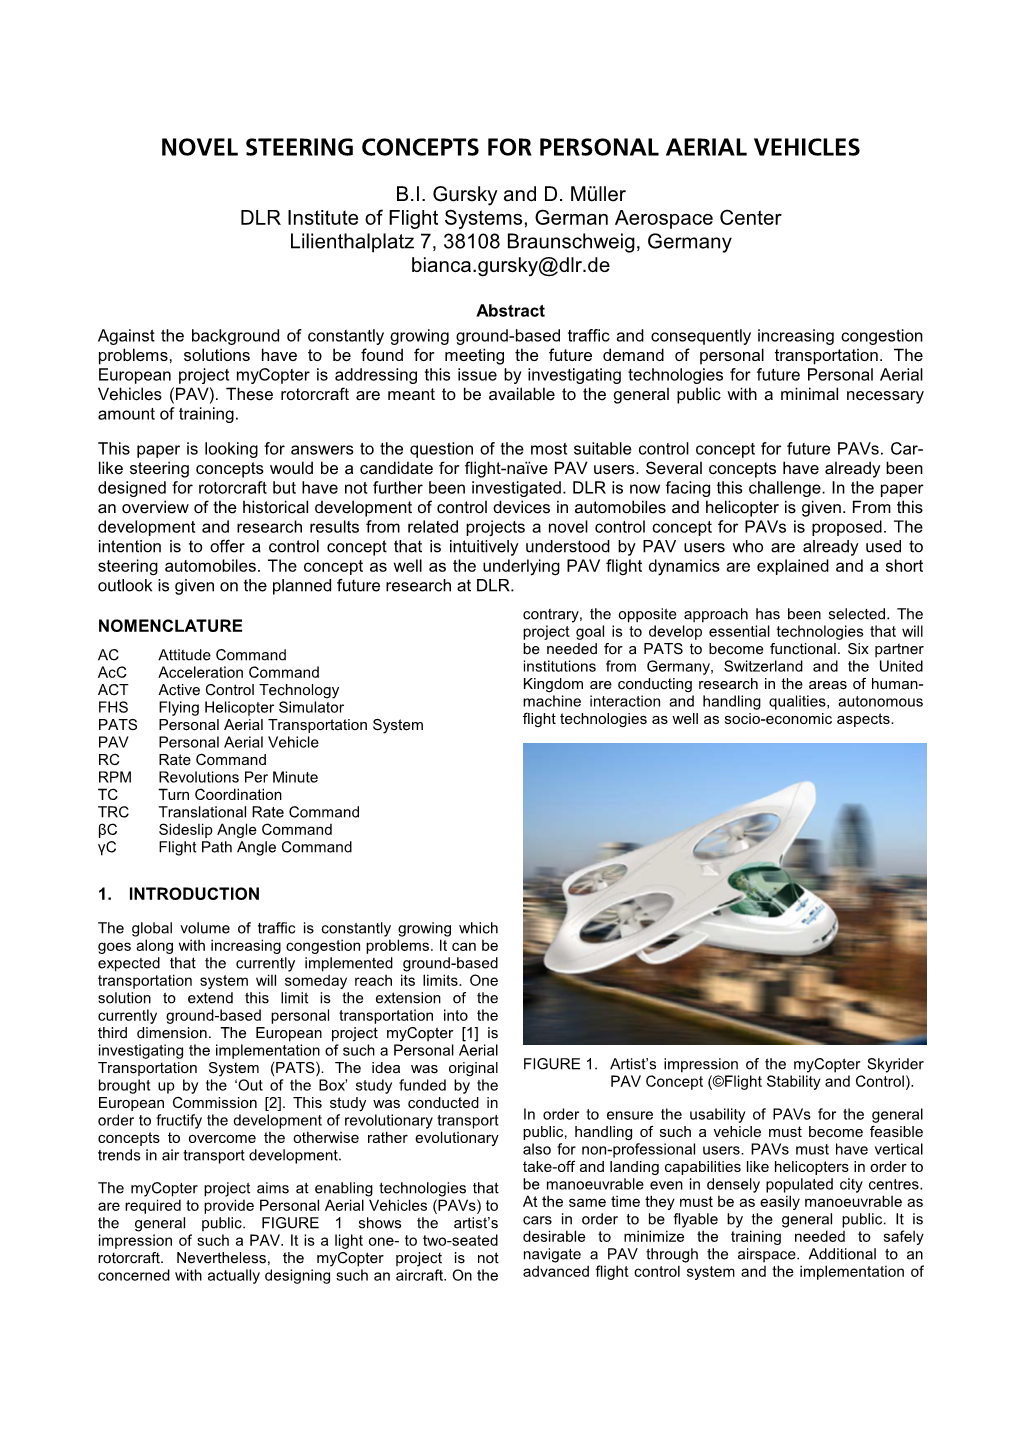 Novel Steering Concepts for Personal Aerial Vehicles